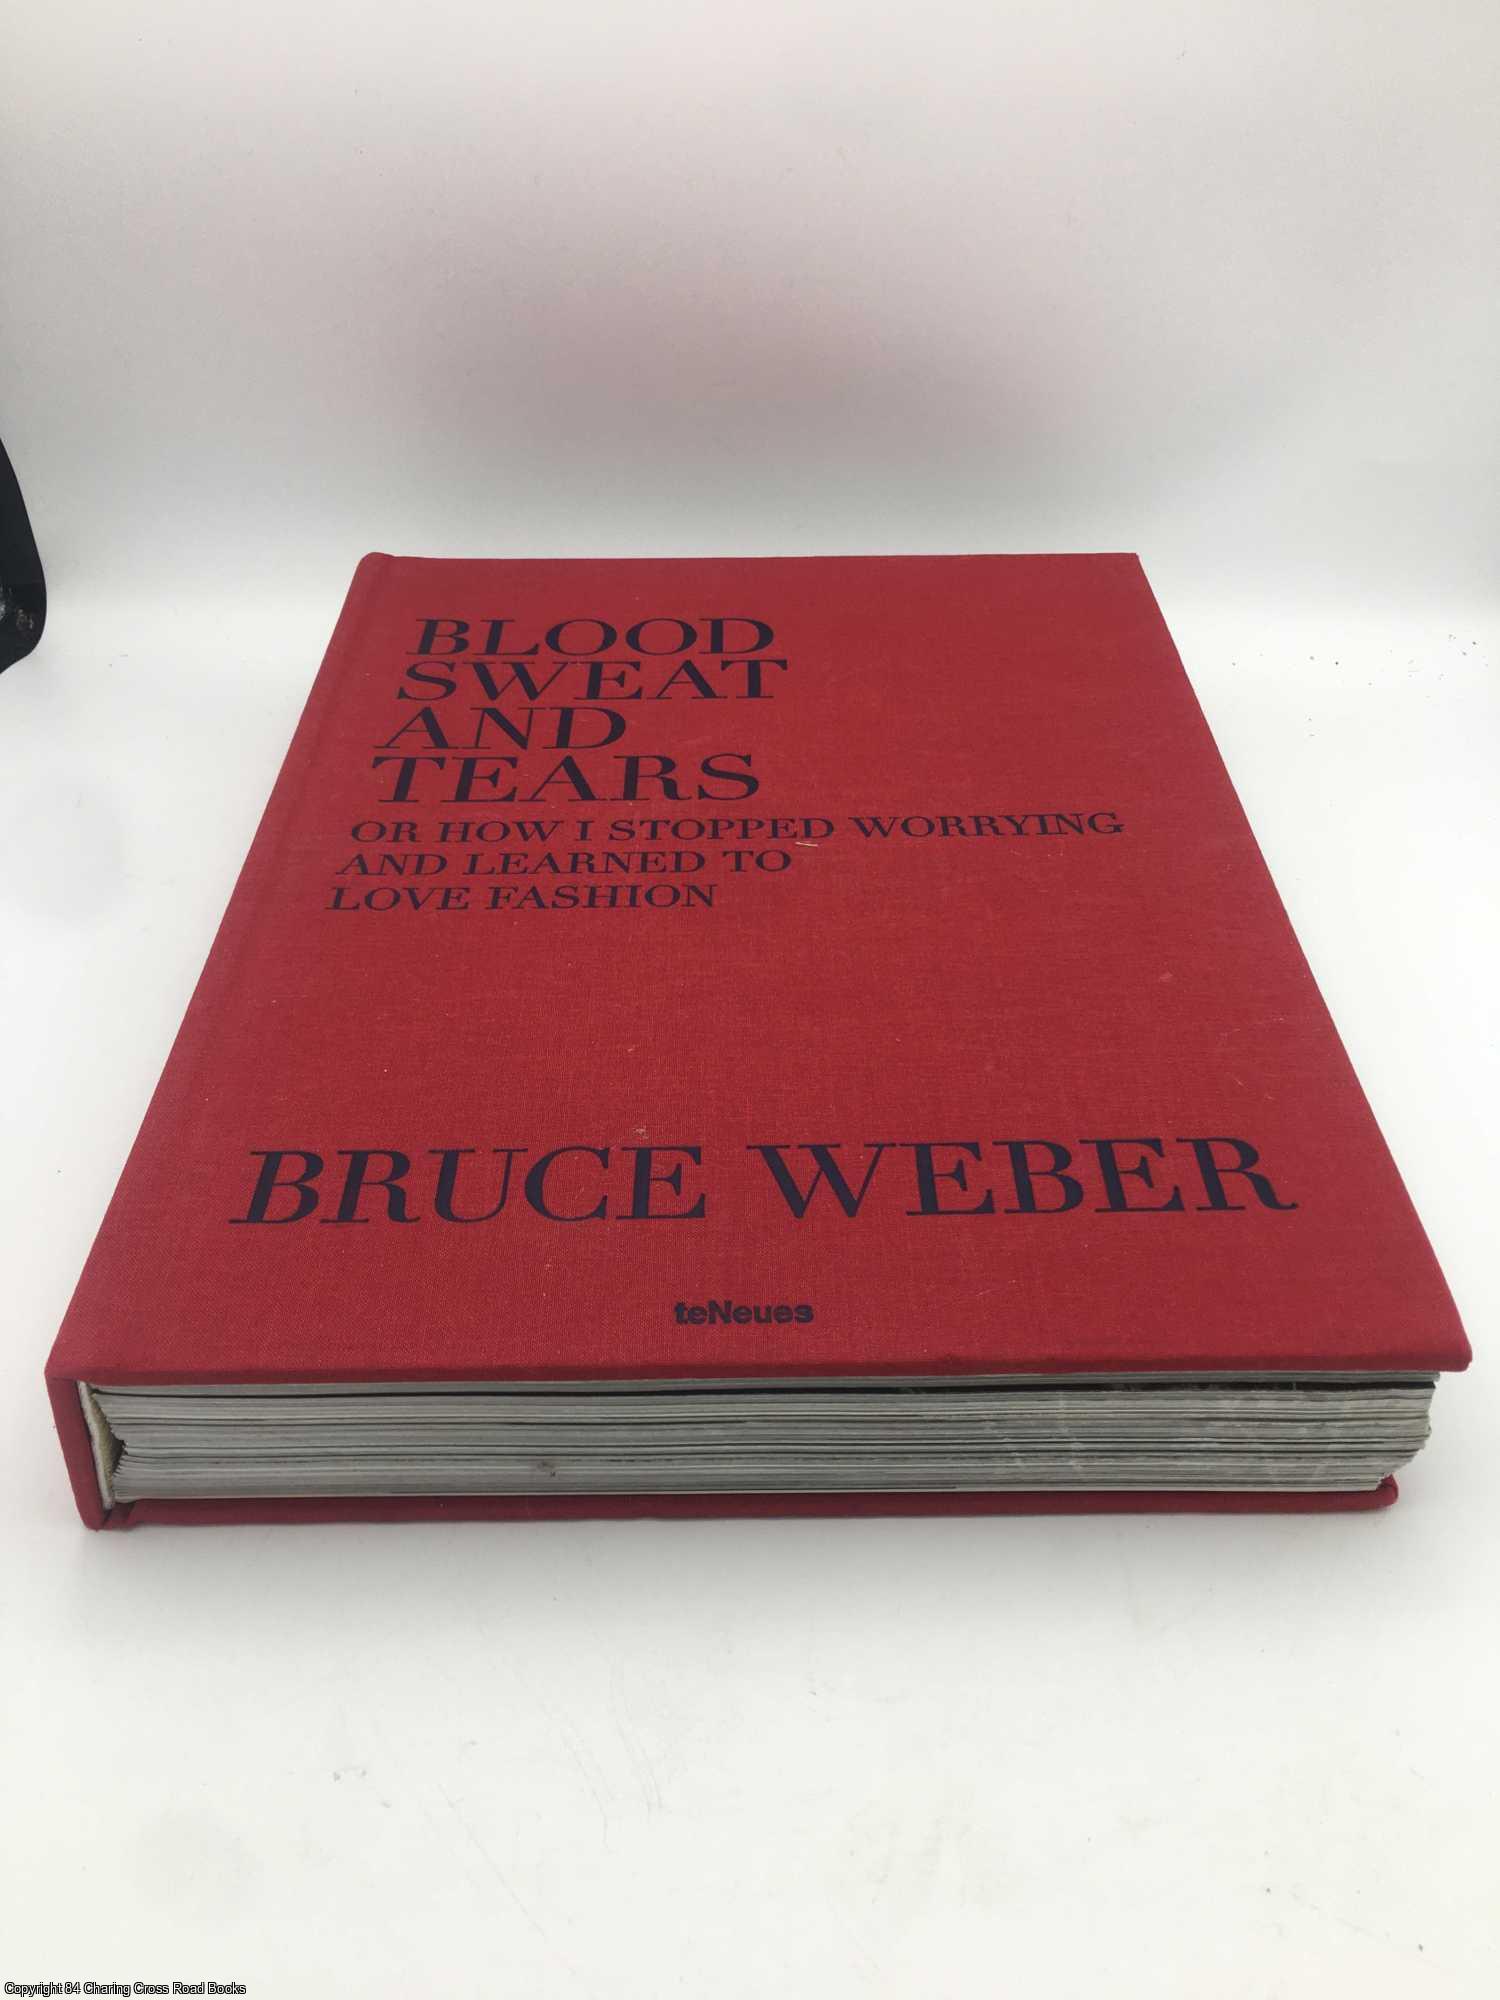 Blood Sweat and Tears by Bruce Weber on 84 Charing Cross Rare Books